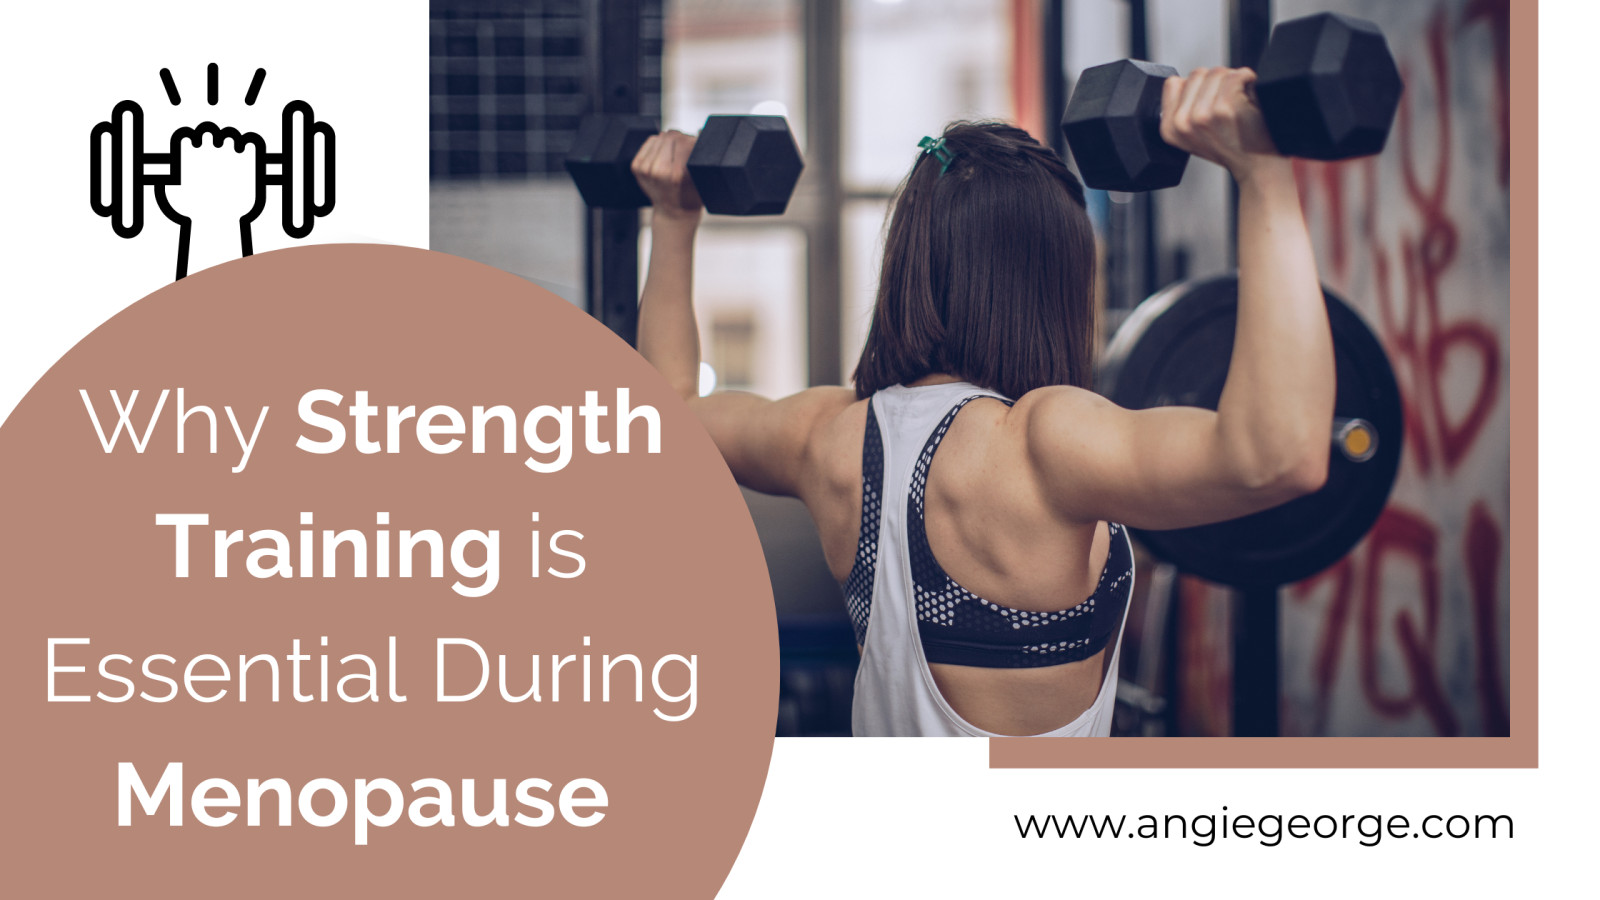 Why Strength Training is Essential During Menopause!